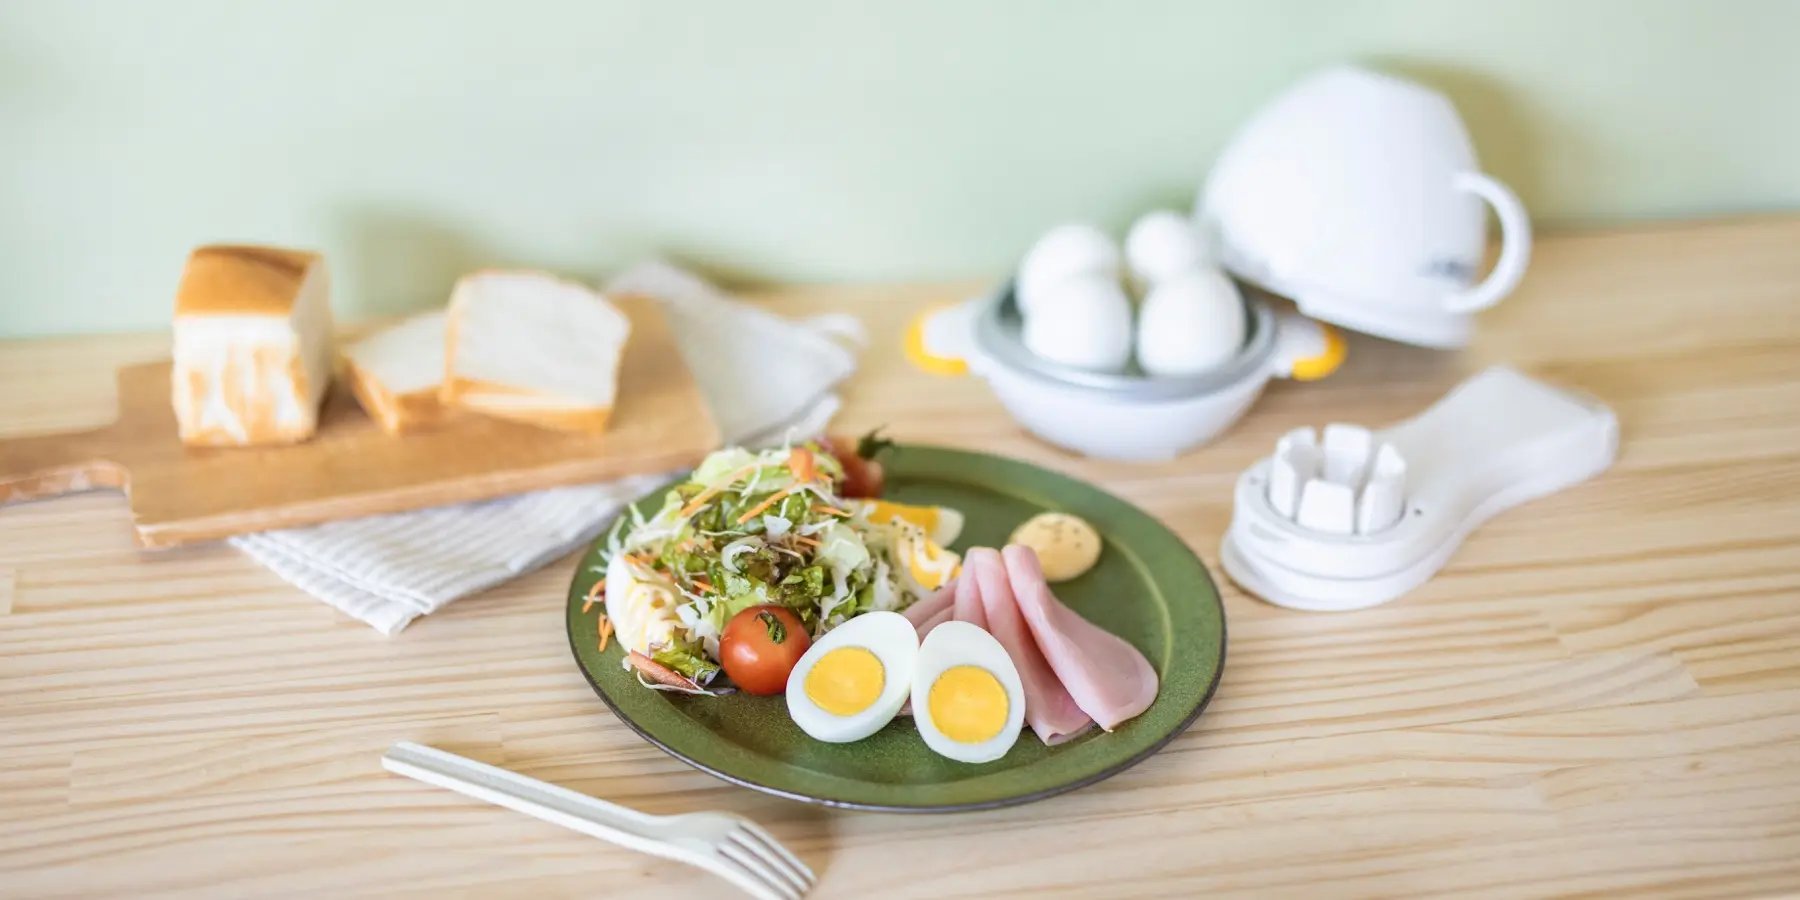 Discover our great selection of Egg Utensils at Globalkitchen Japan.